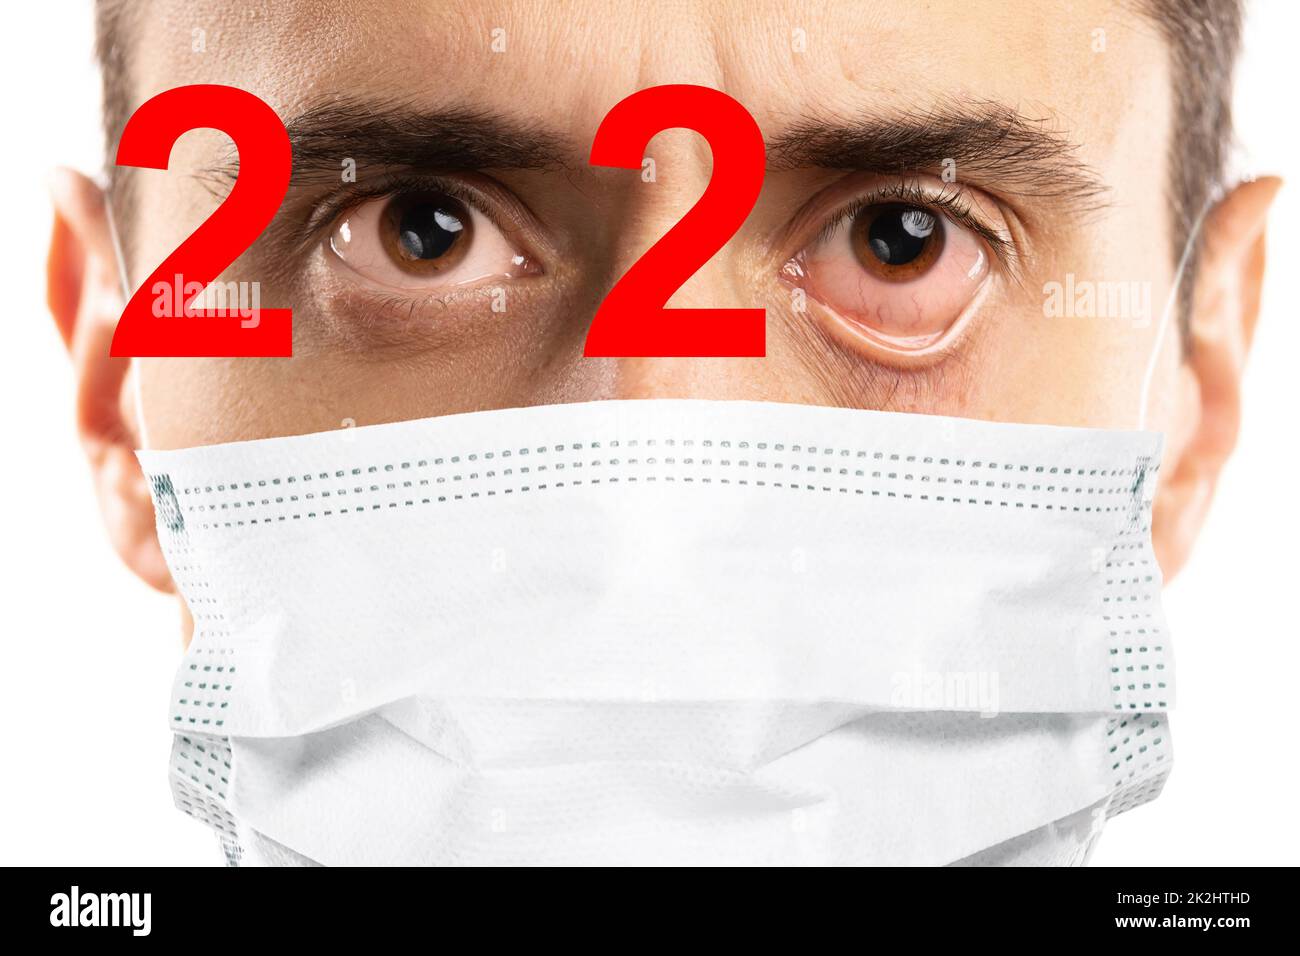 2020 was a COVID-19 pandemic year. Man with symptoms wearing mask. Stock Photo